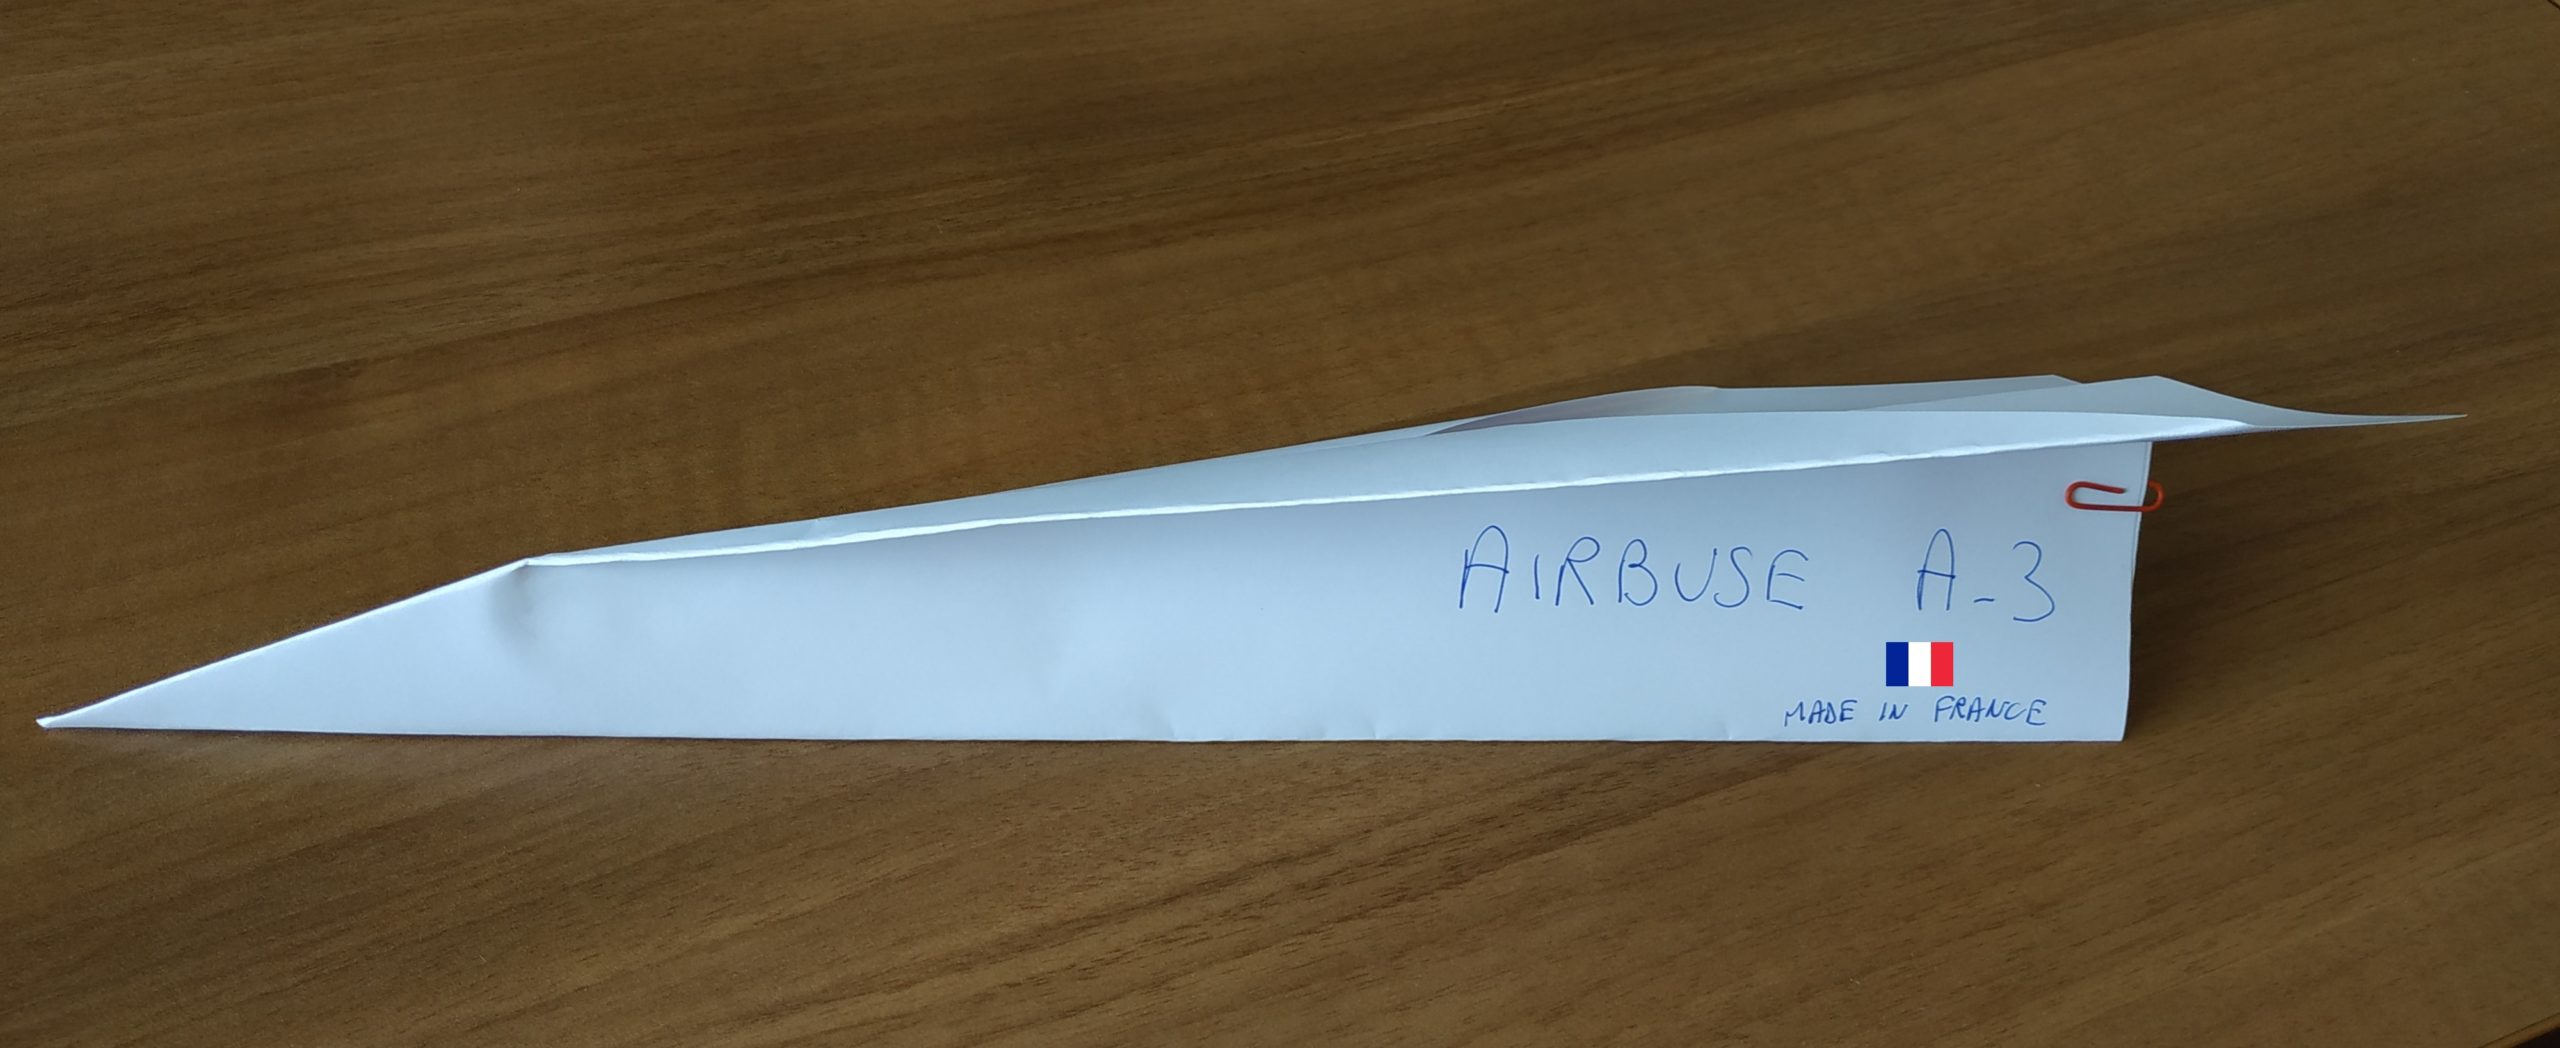 Airbuse 1